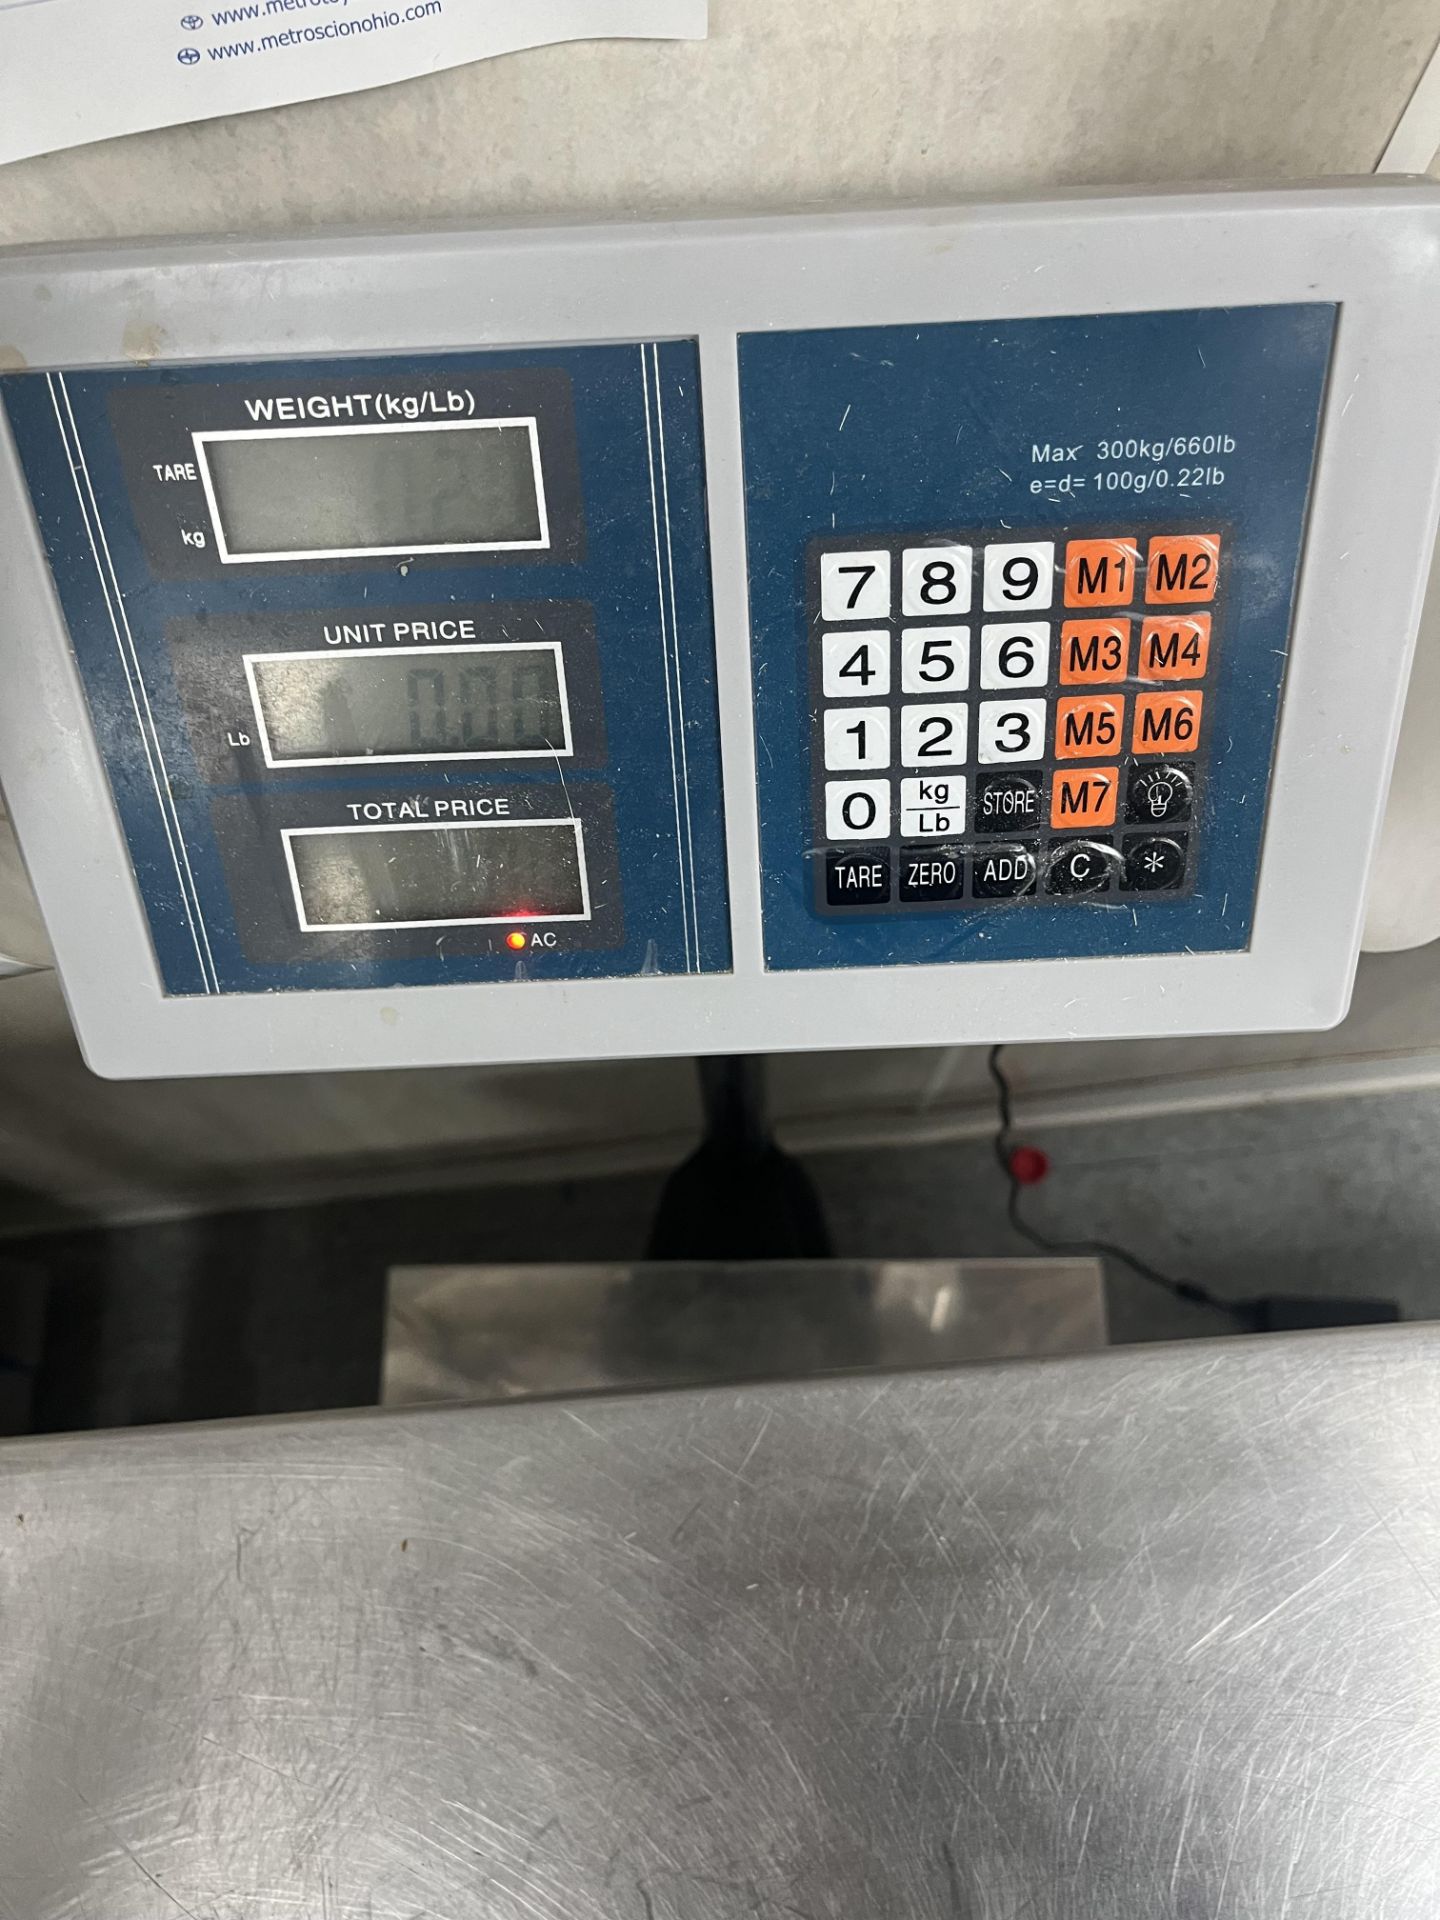 TABLE SCALE MAX 300 KG/660 LBS E=D=100G/0.22LB (DIMS 16" W 20" L (Located Cleveland, OH) - Image 2 of 4